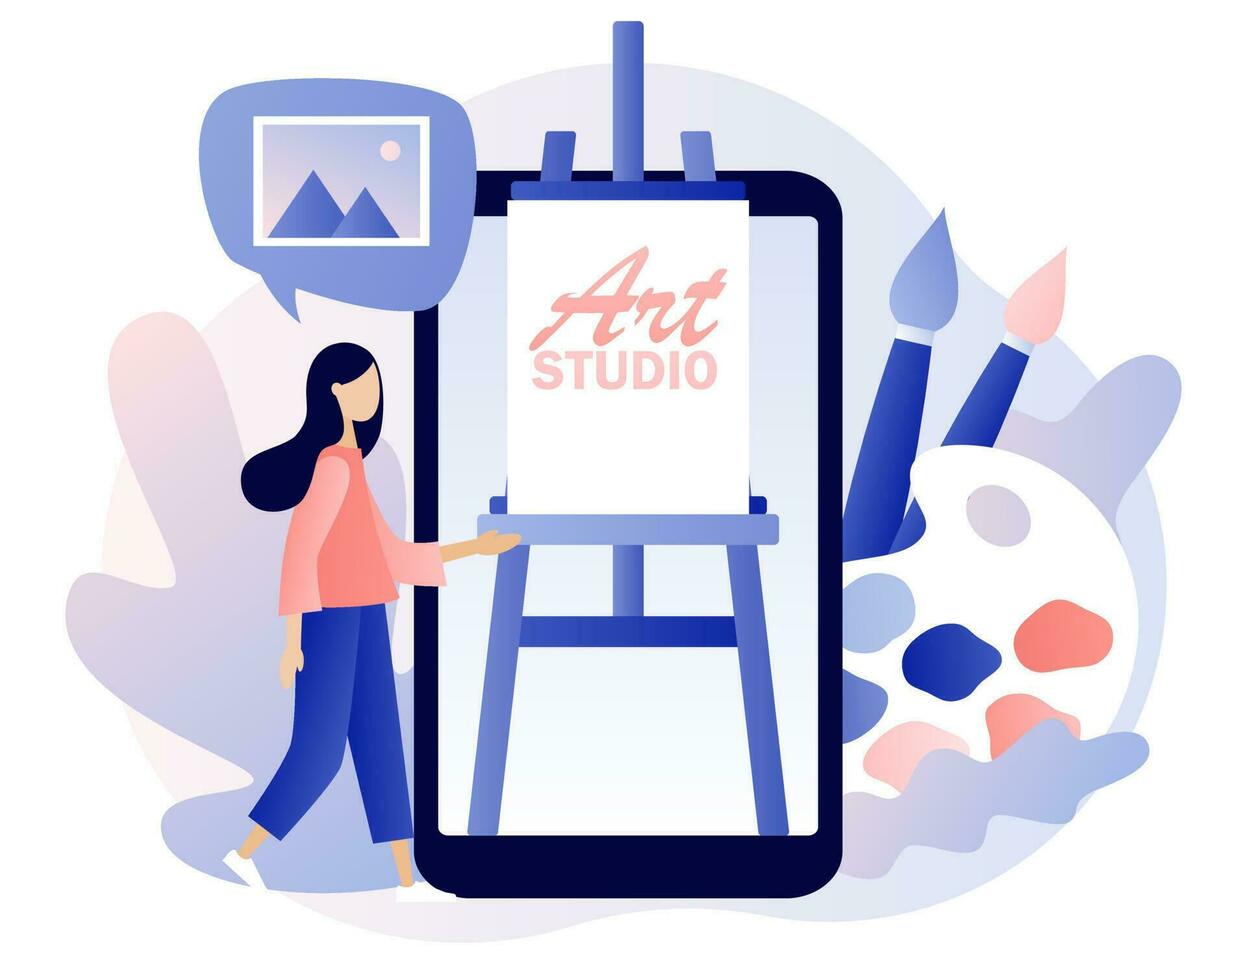 Artist. Art school or studio online. Tiny woman artist with canvas on easel on smartphone screen, pallete and brushes. Art workshop. Create picture. Modern flat cartoon style. Vector illustration